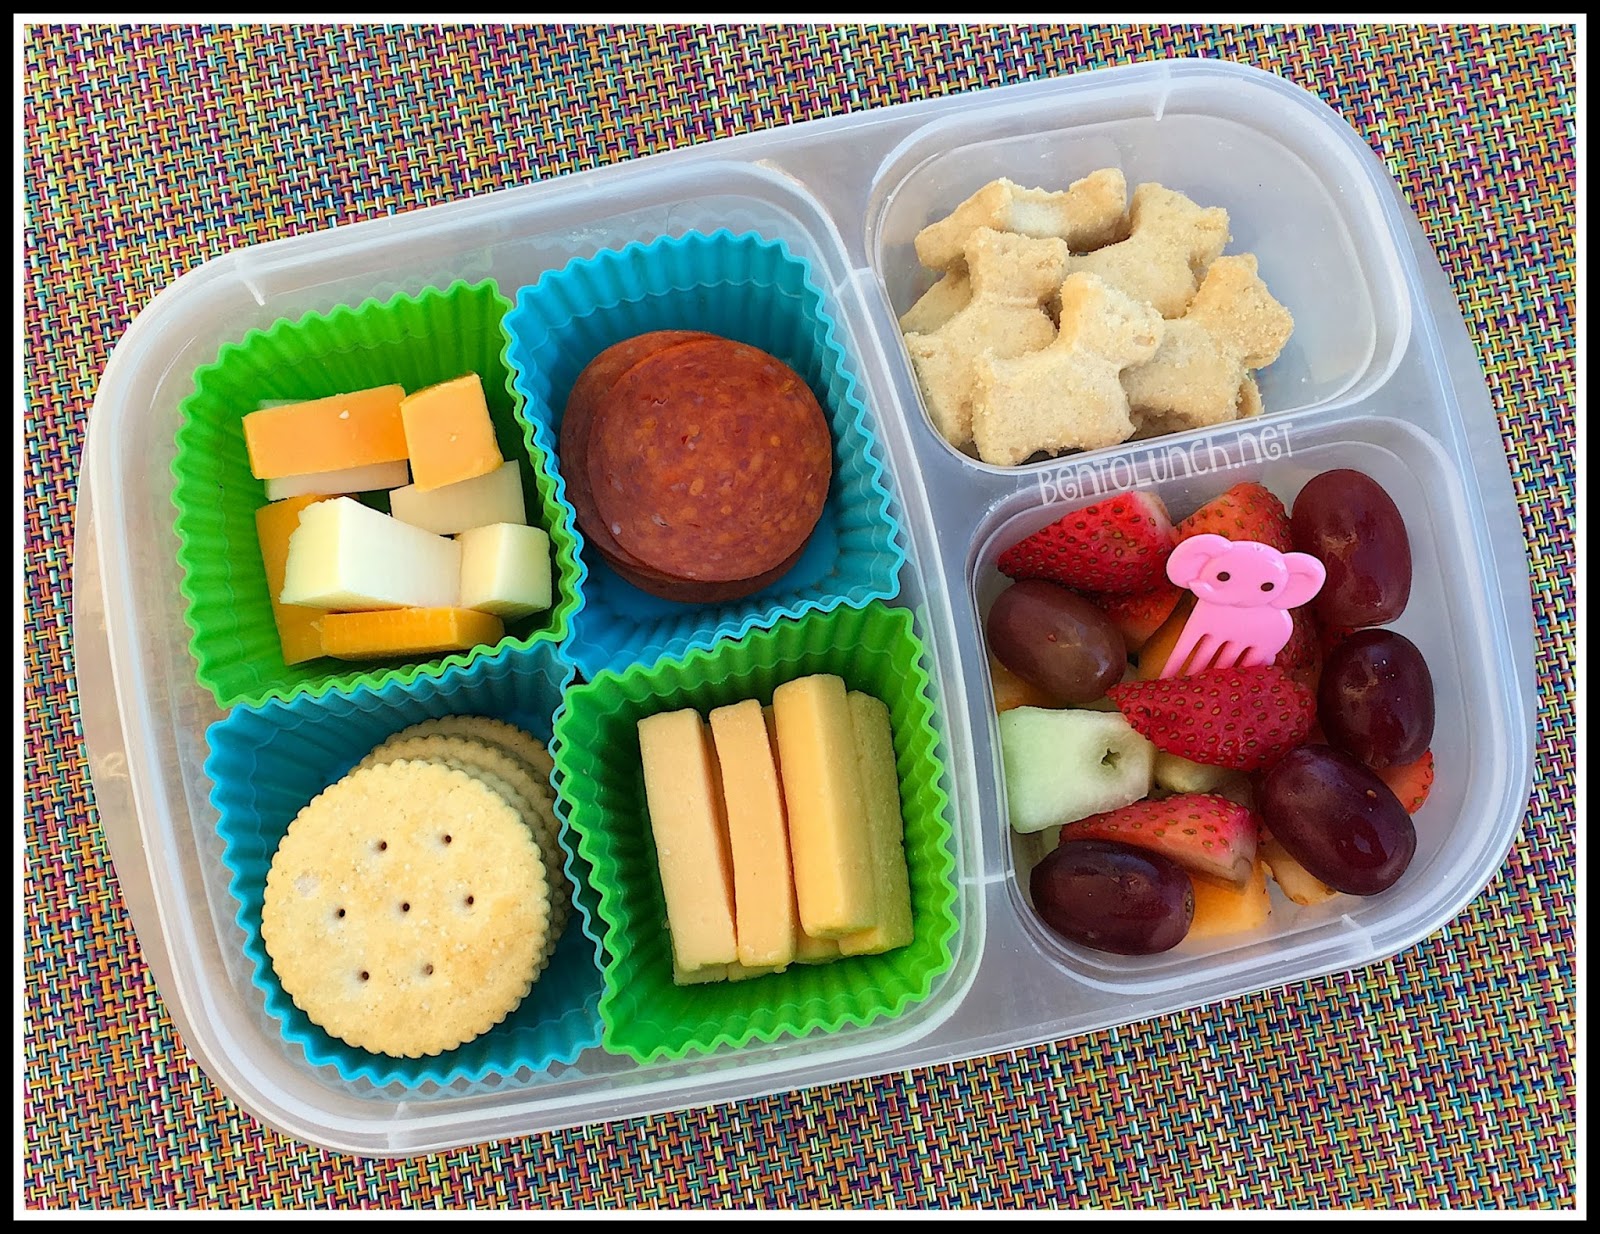 Delicious Homemade Lunchables - Perfect for On-the-go!